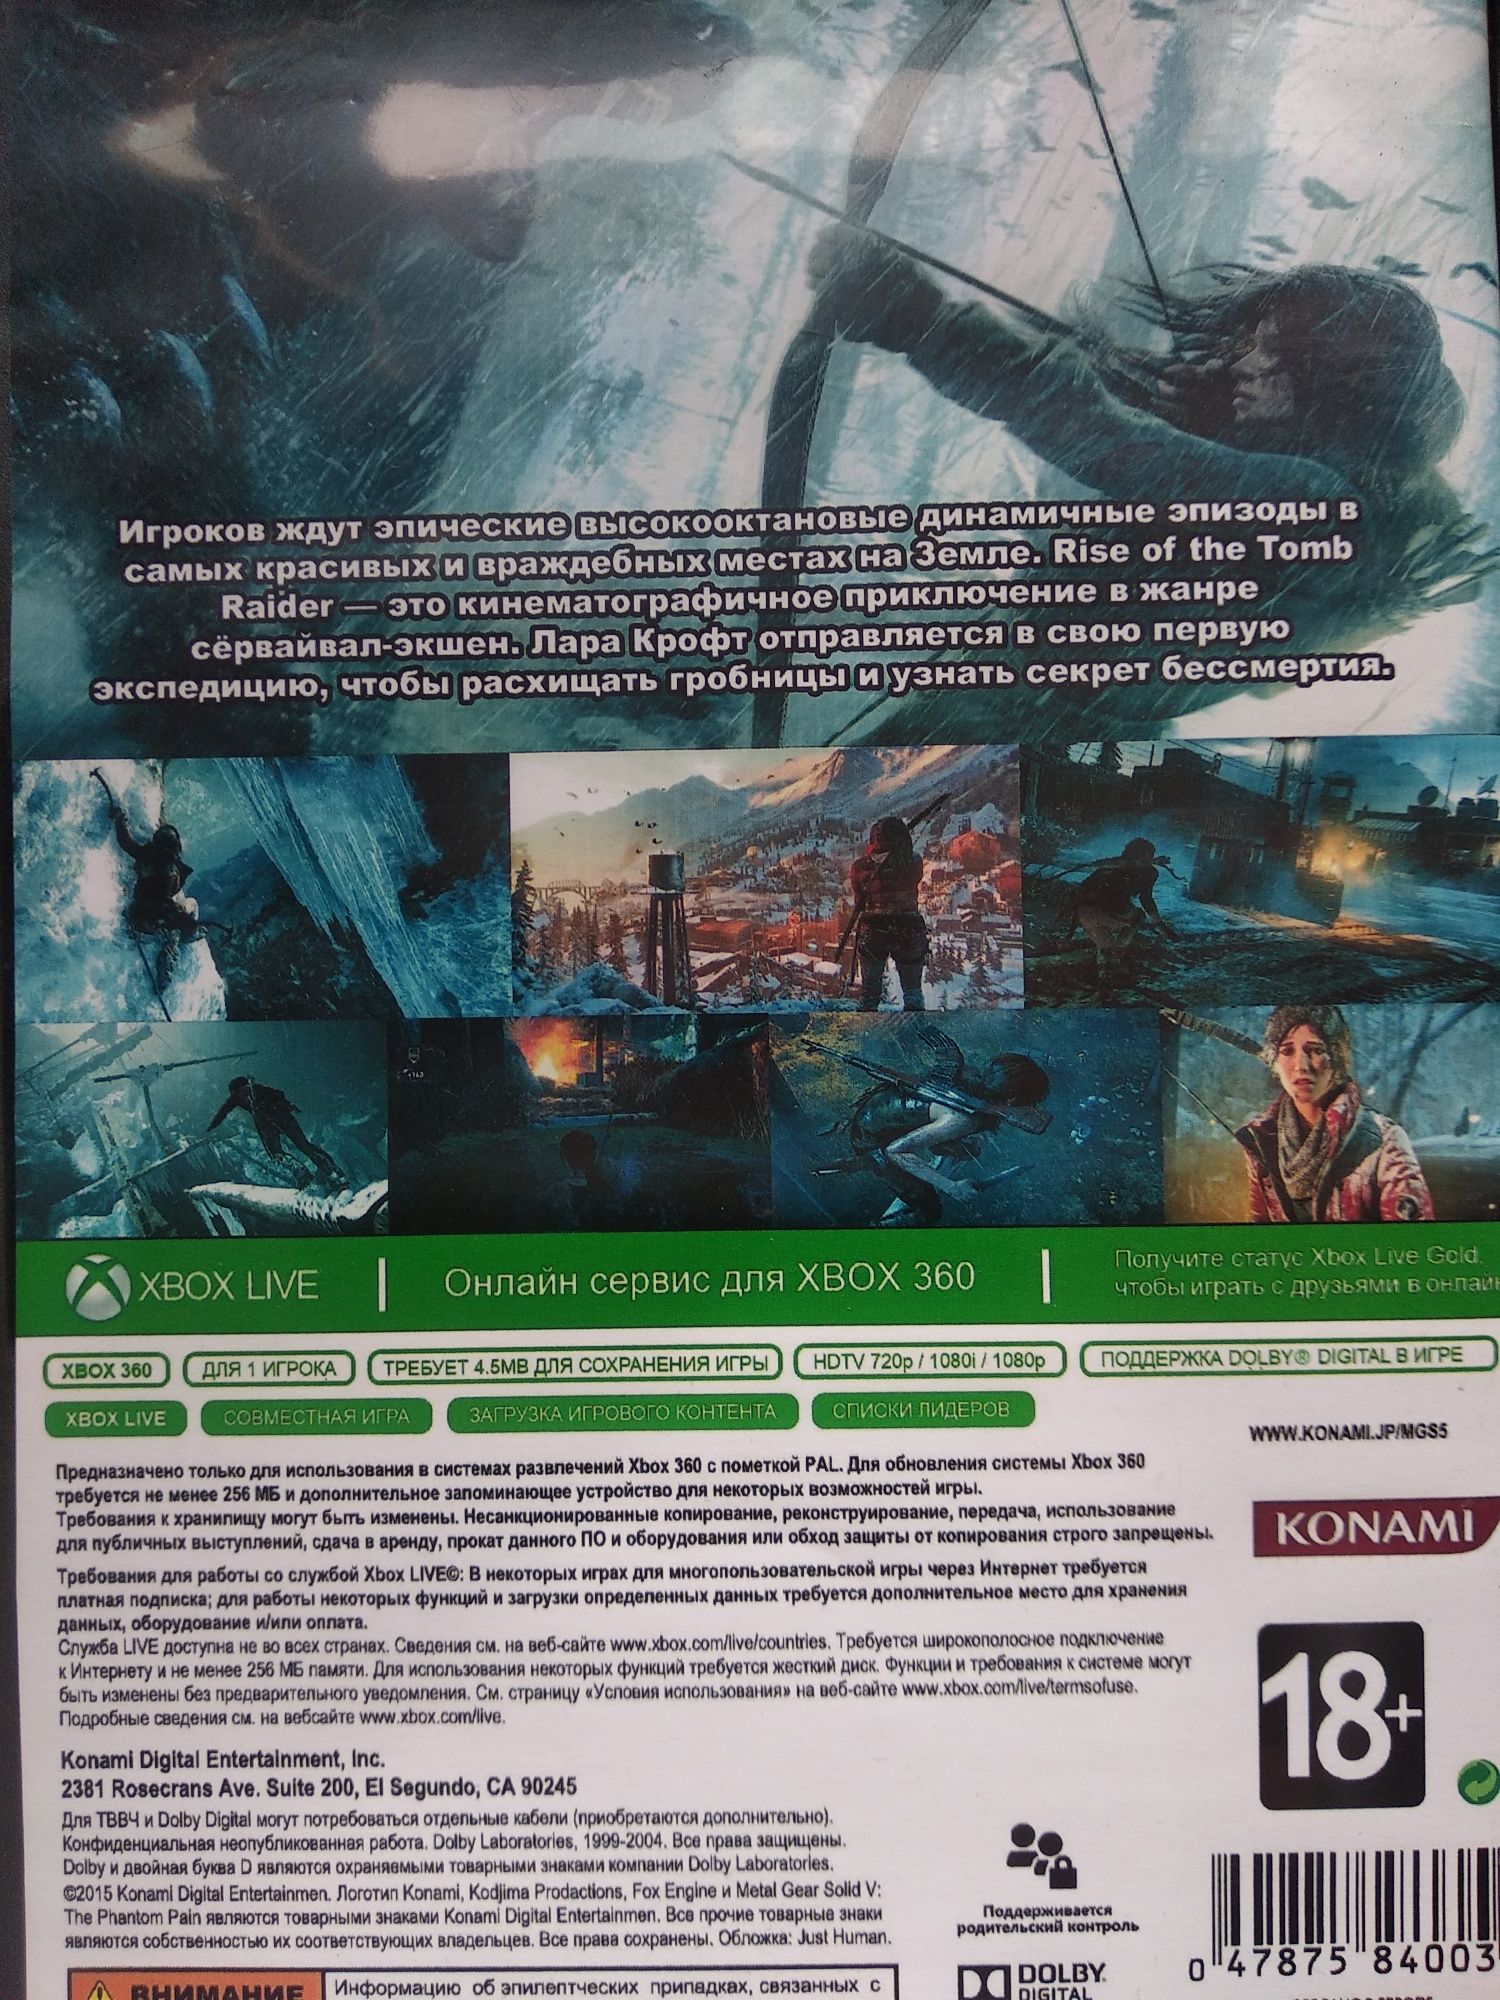 Farcry 4, Rise of Tomb Raider, all of Duty, игры XBOX 360 цена за все.